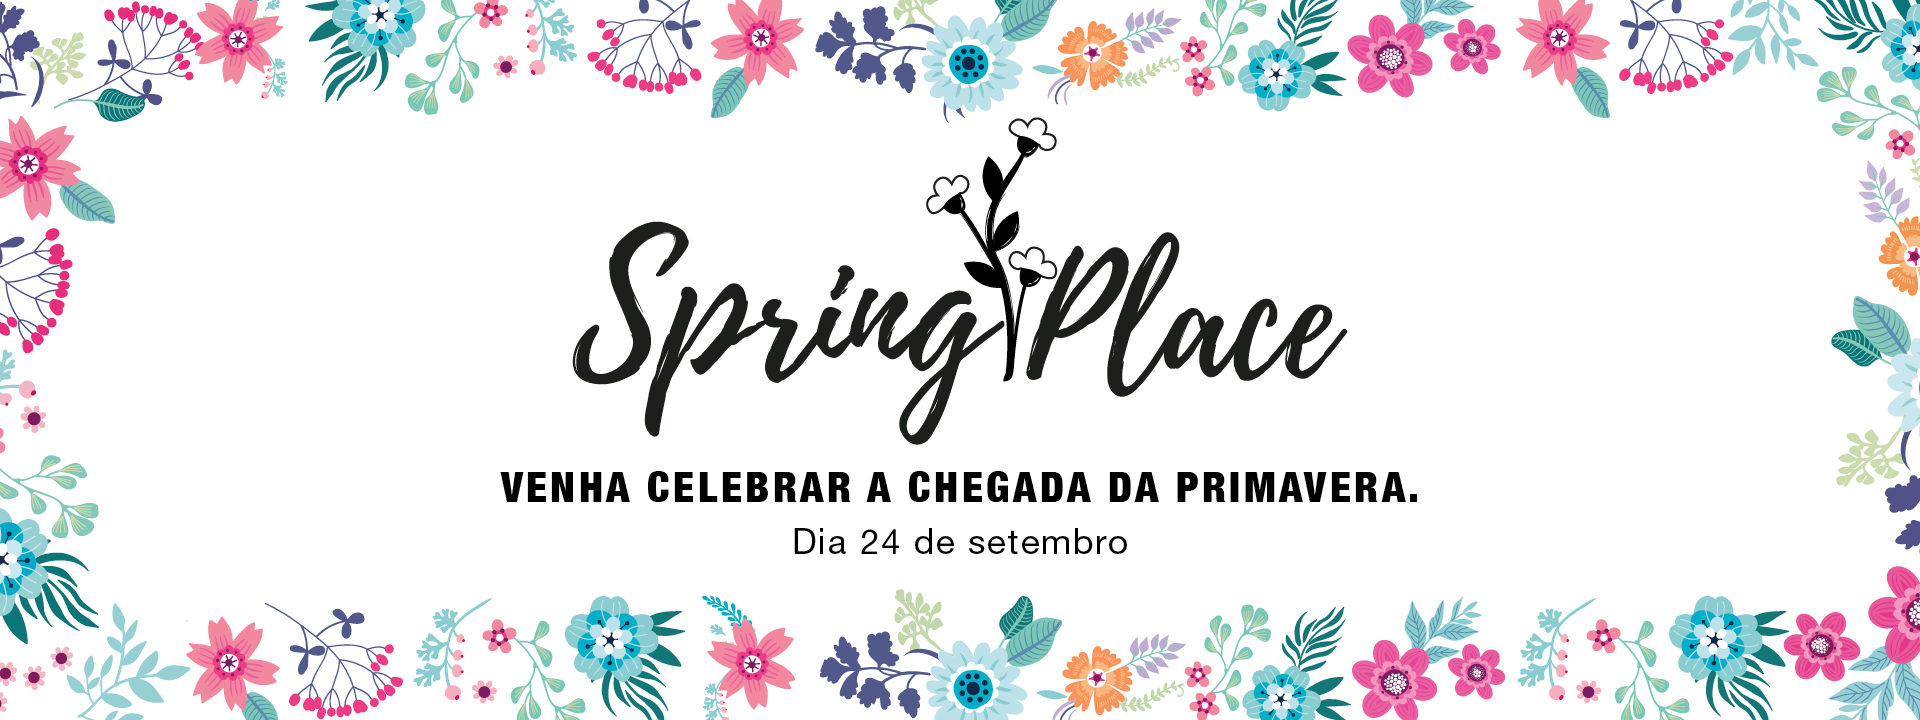 Spring Place